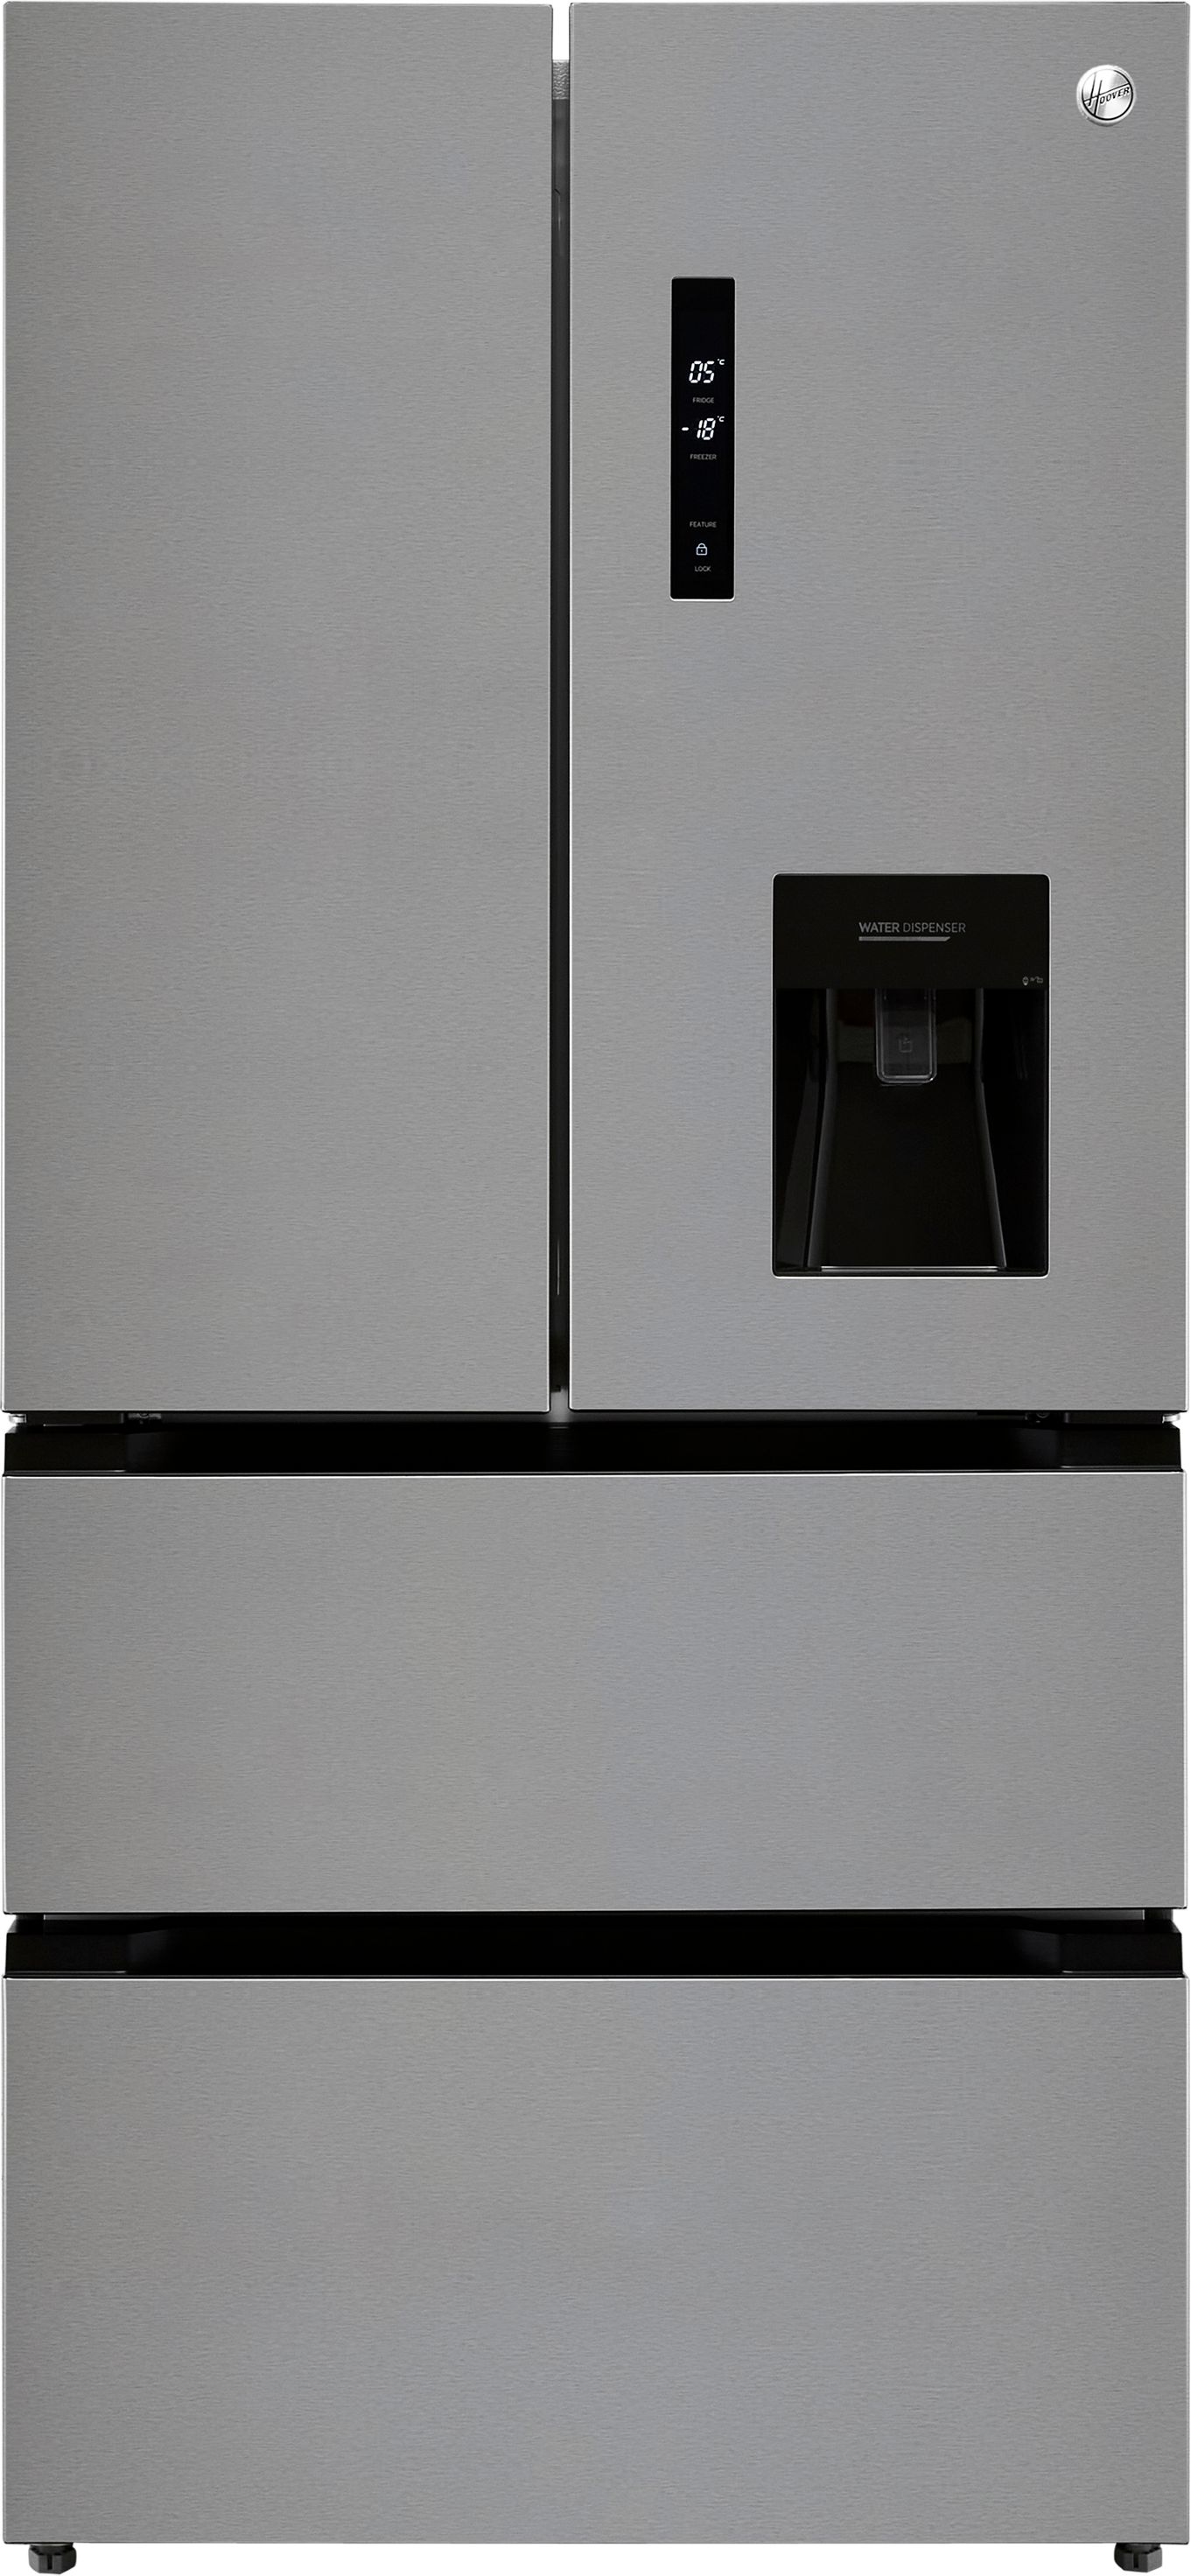 Hoover HSF818FXWDK Frost Free American Fridge Freezer - Stainless Steel - F Rated